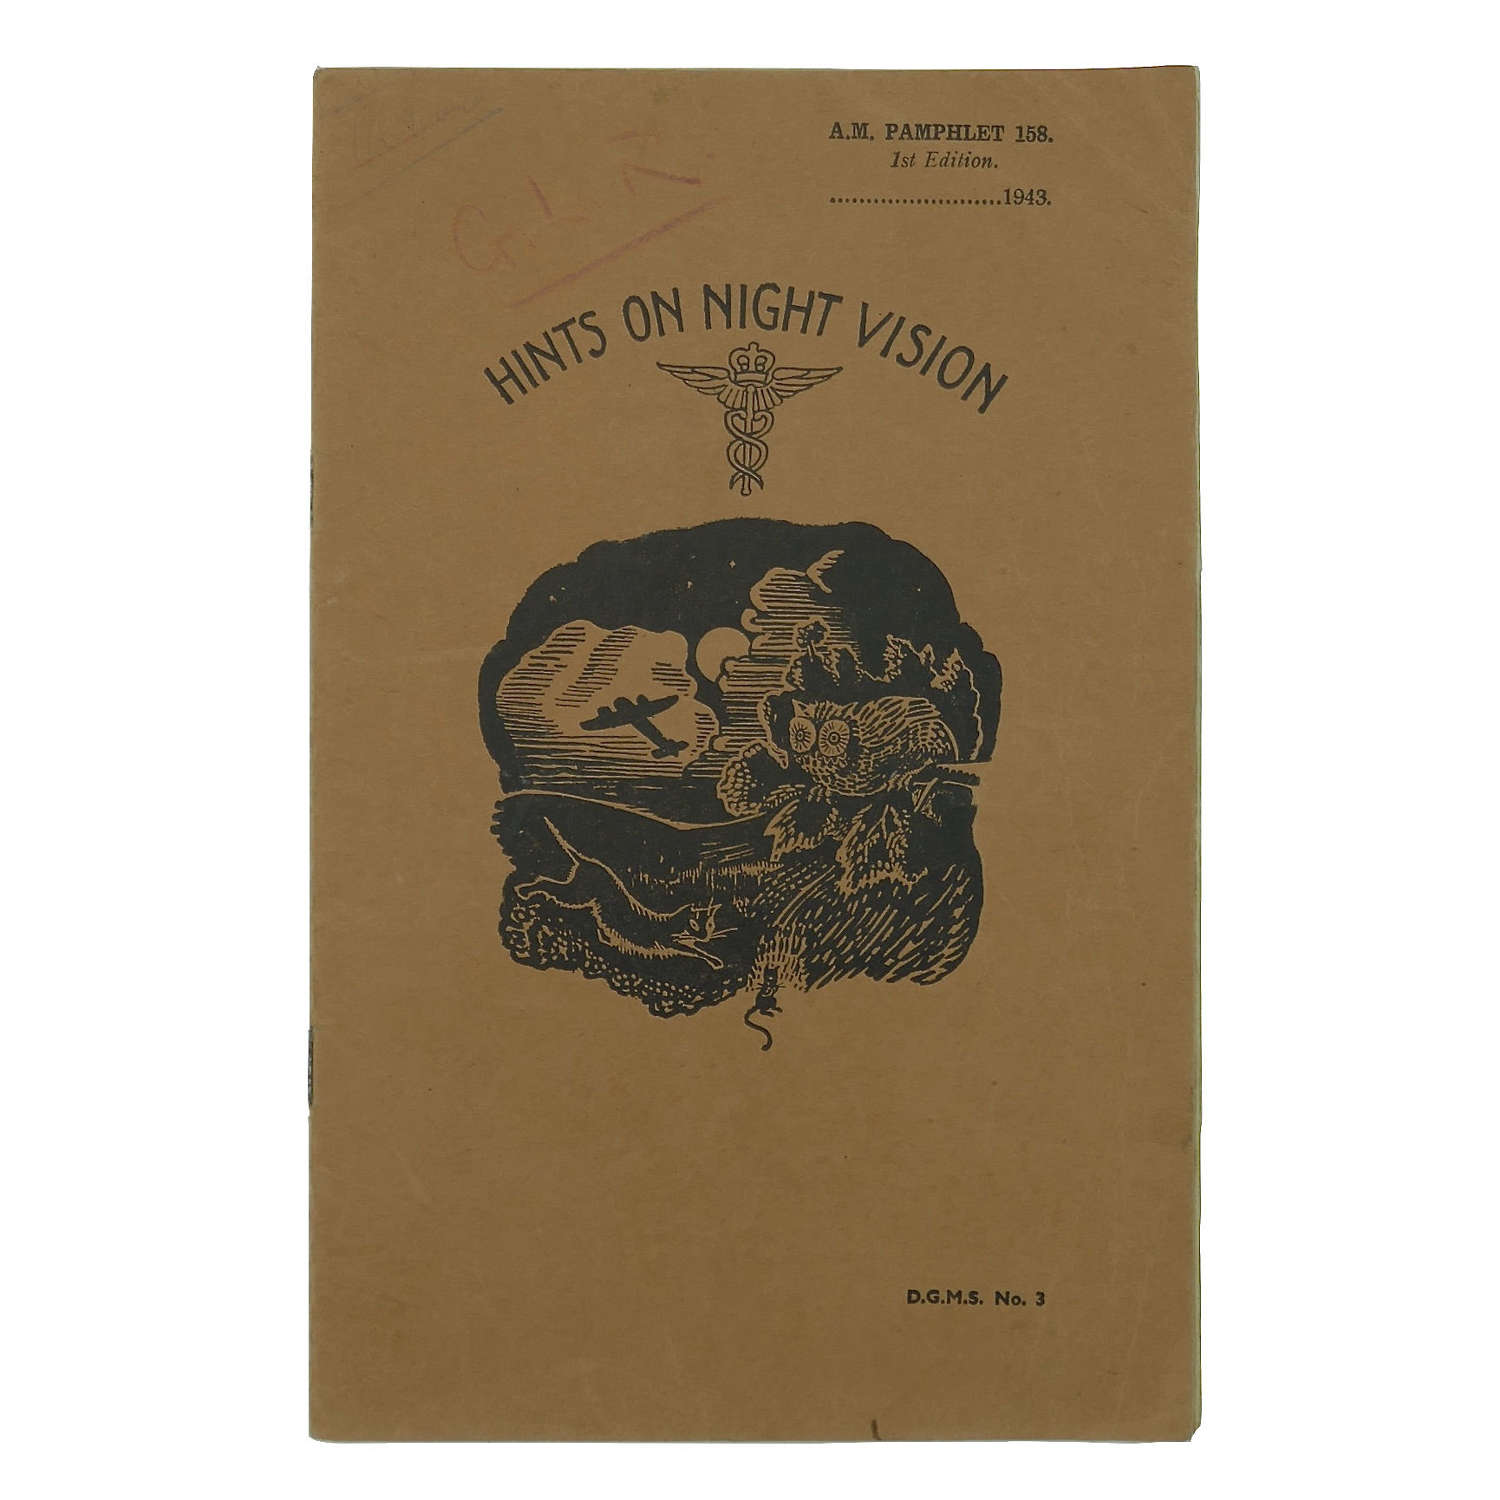 Air Ministry pamphlet - Hints On Night Vision